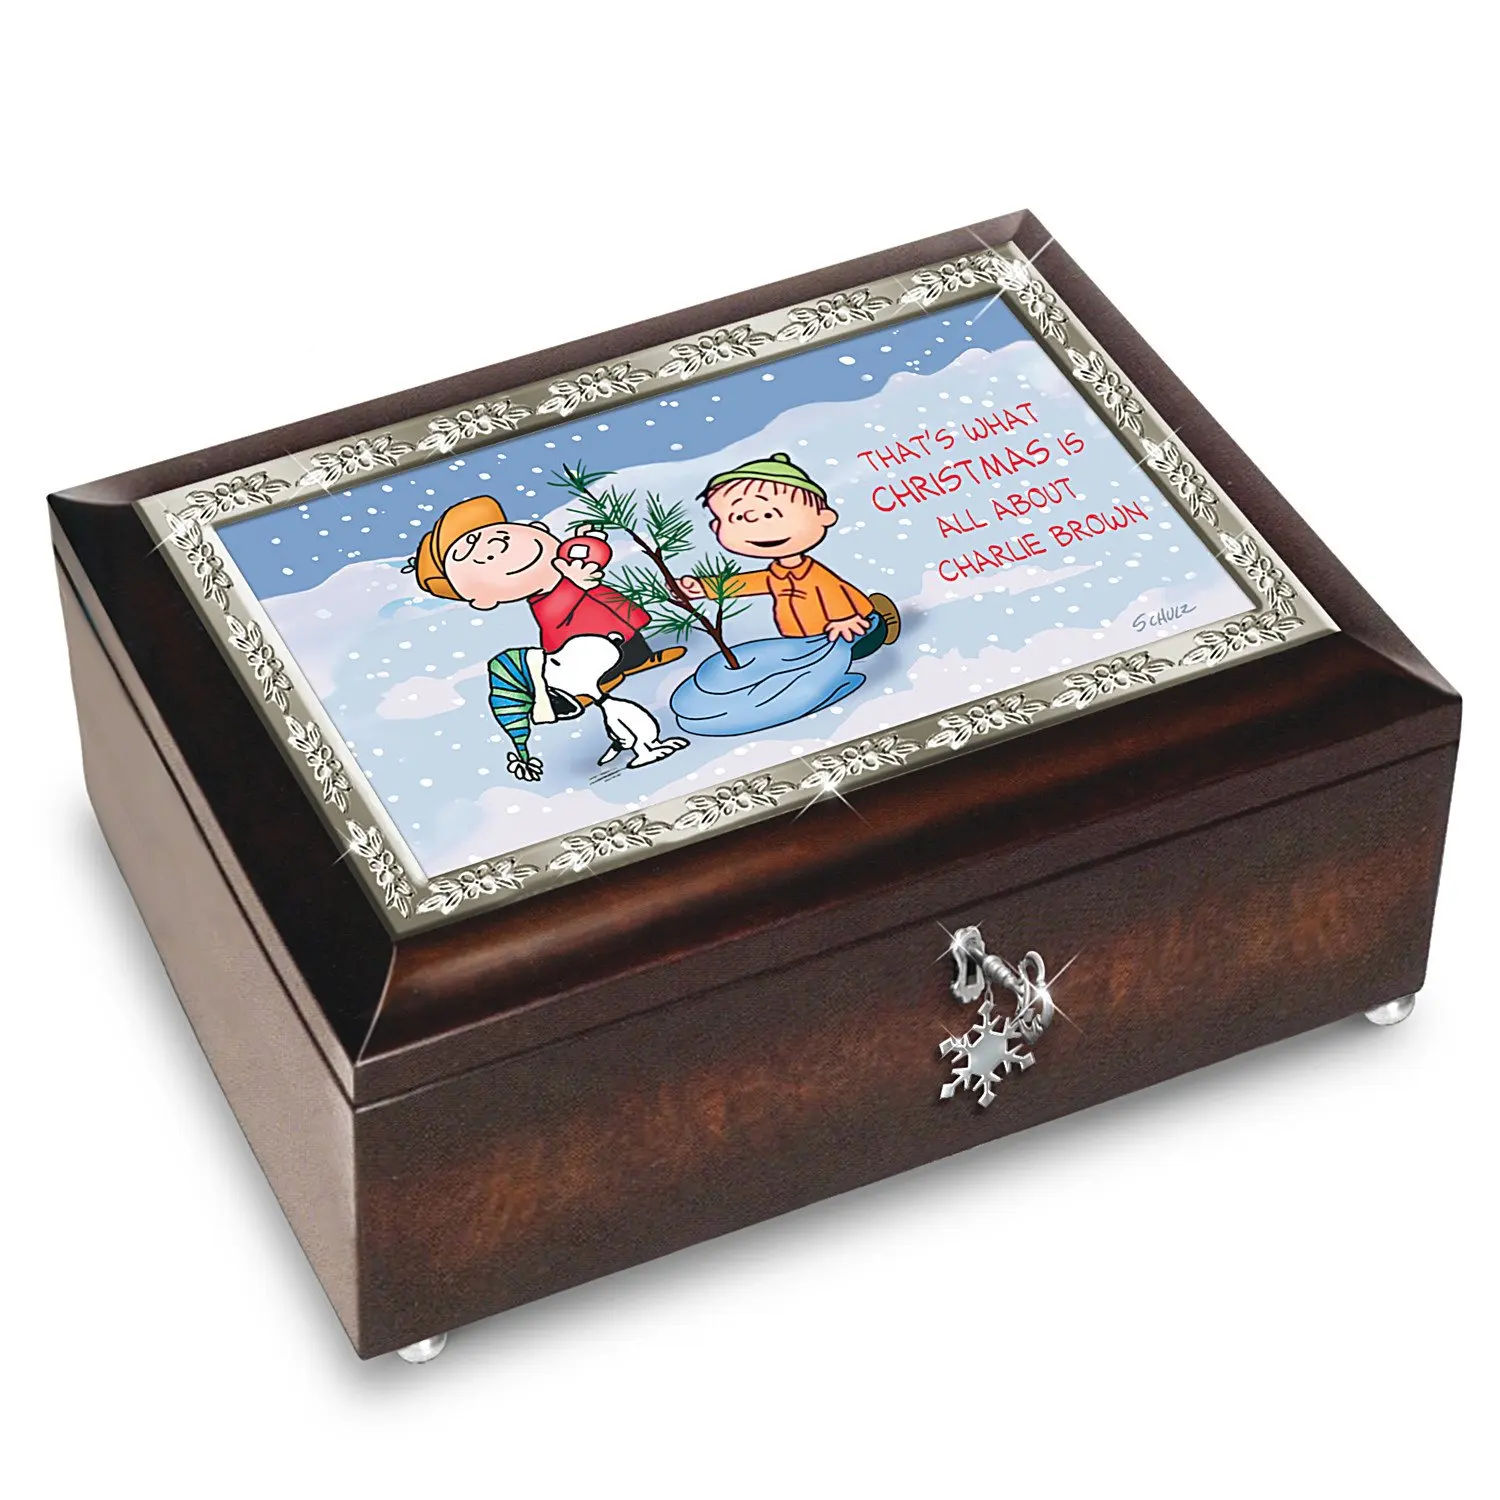 Get Quotations · A Charlie Brown Christmas 50th Anniversary Music Box Features PEANUTS Art on Lid by The Bradford